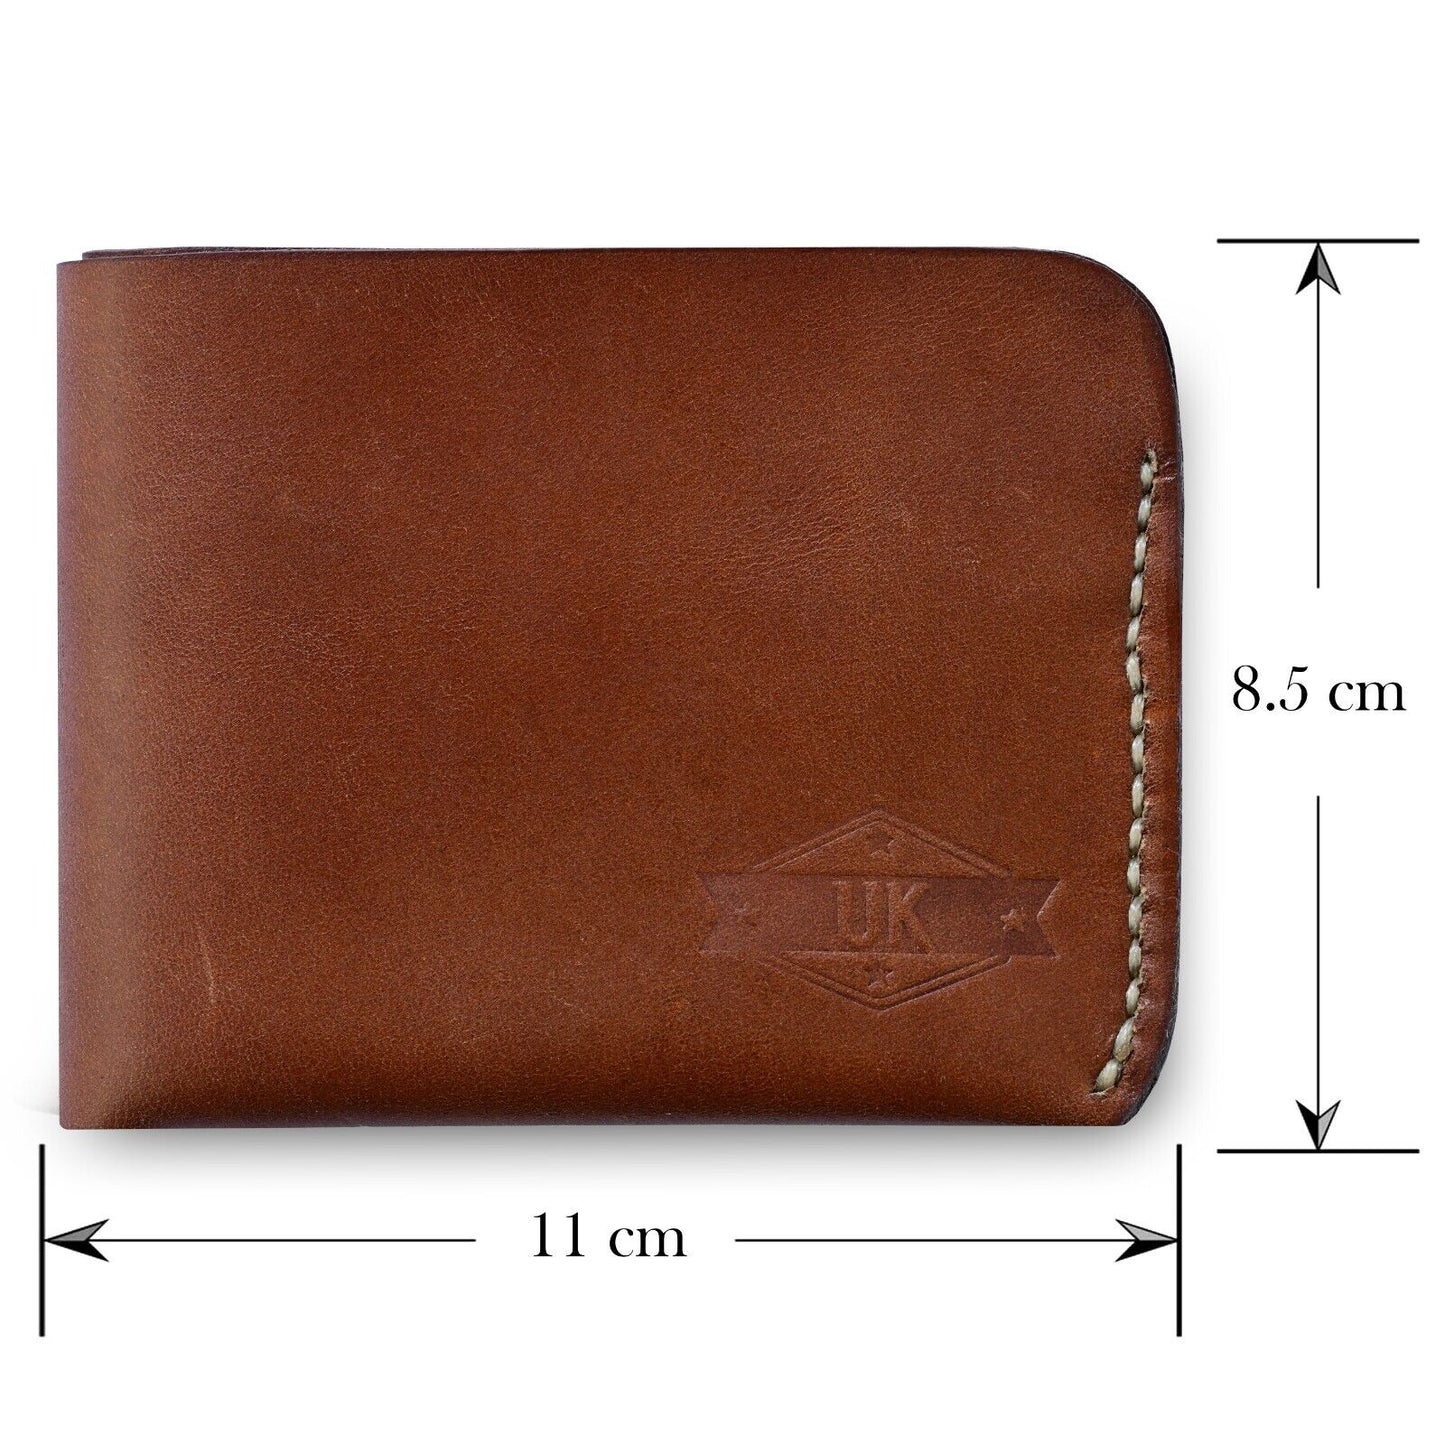 Urban Kevlar Handcrafted Genuine Leather Wallet - Classic Men's Bifold Wallet - Gift For Mens Brown